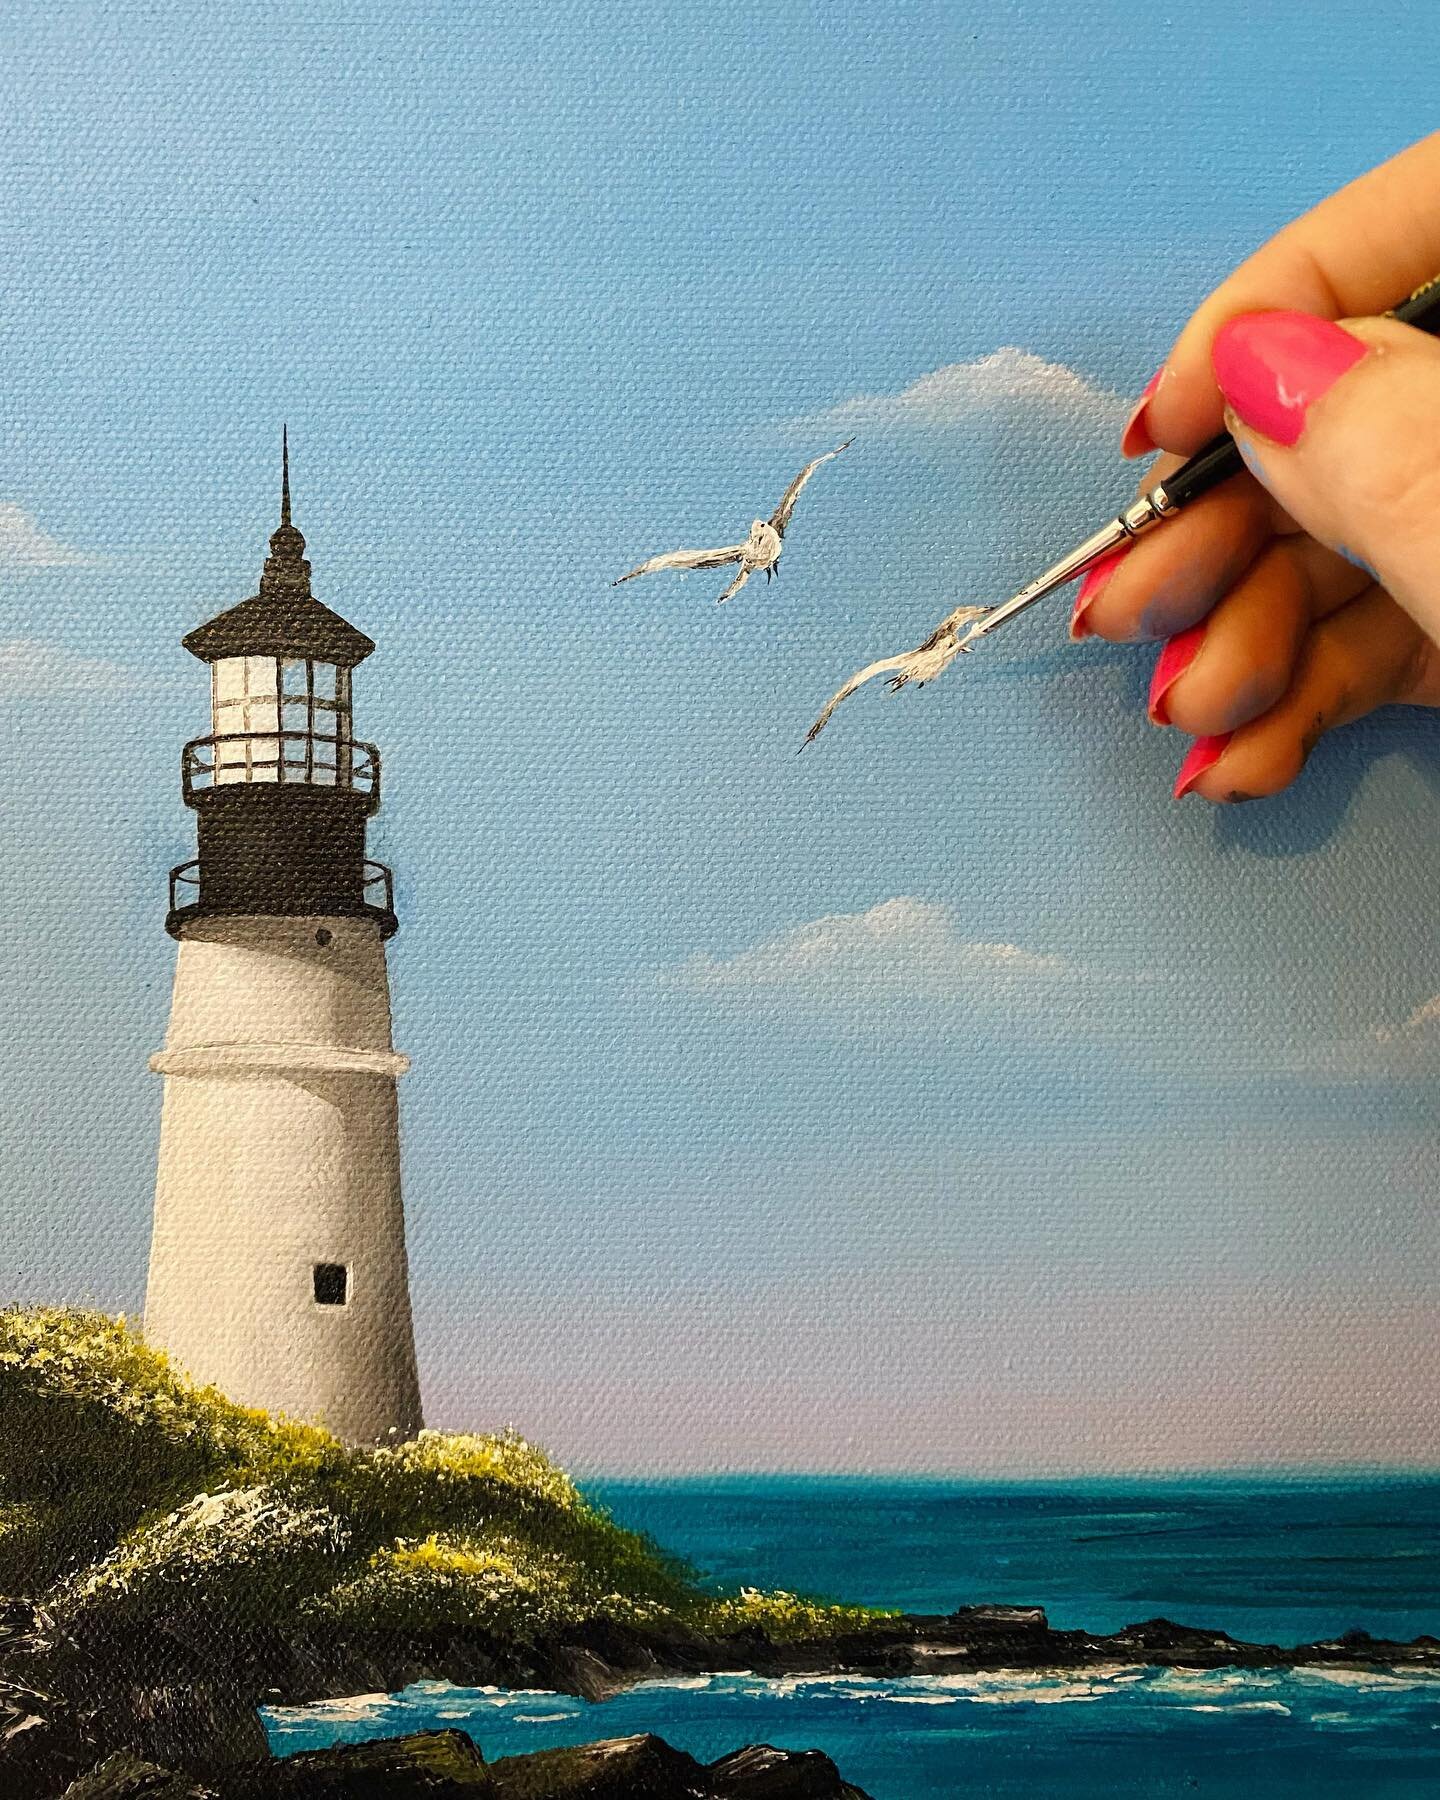 The memorable seagulls made it to my canvas. Swipe to see why.😄
.
.
#seagulls #memories #lighthouse #oceanview #oceanside #acrylicpainting #paintingoftheday #handpainted #realism #landscapepainting #newengland #birds #birdsofinstagram #oceanbirds  #